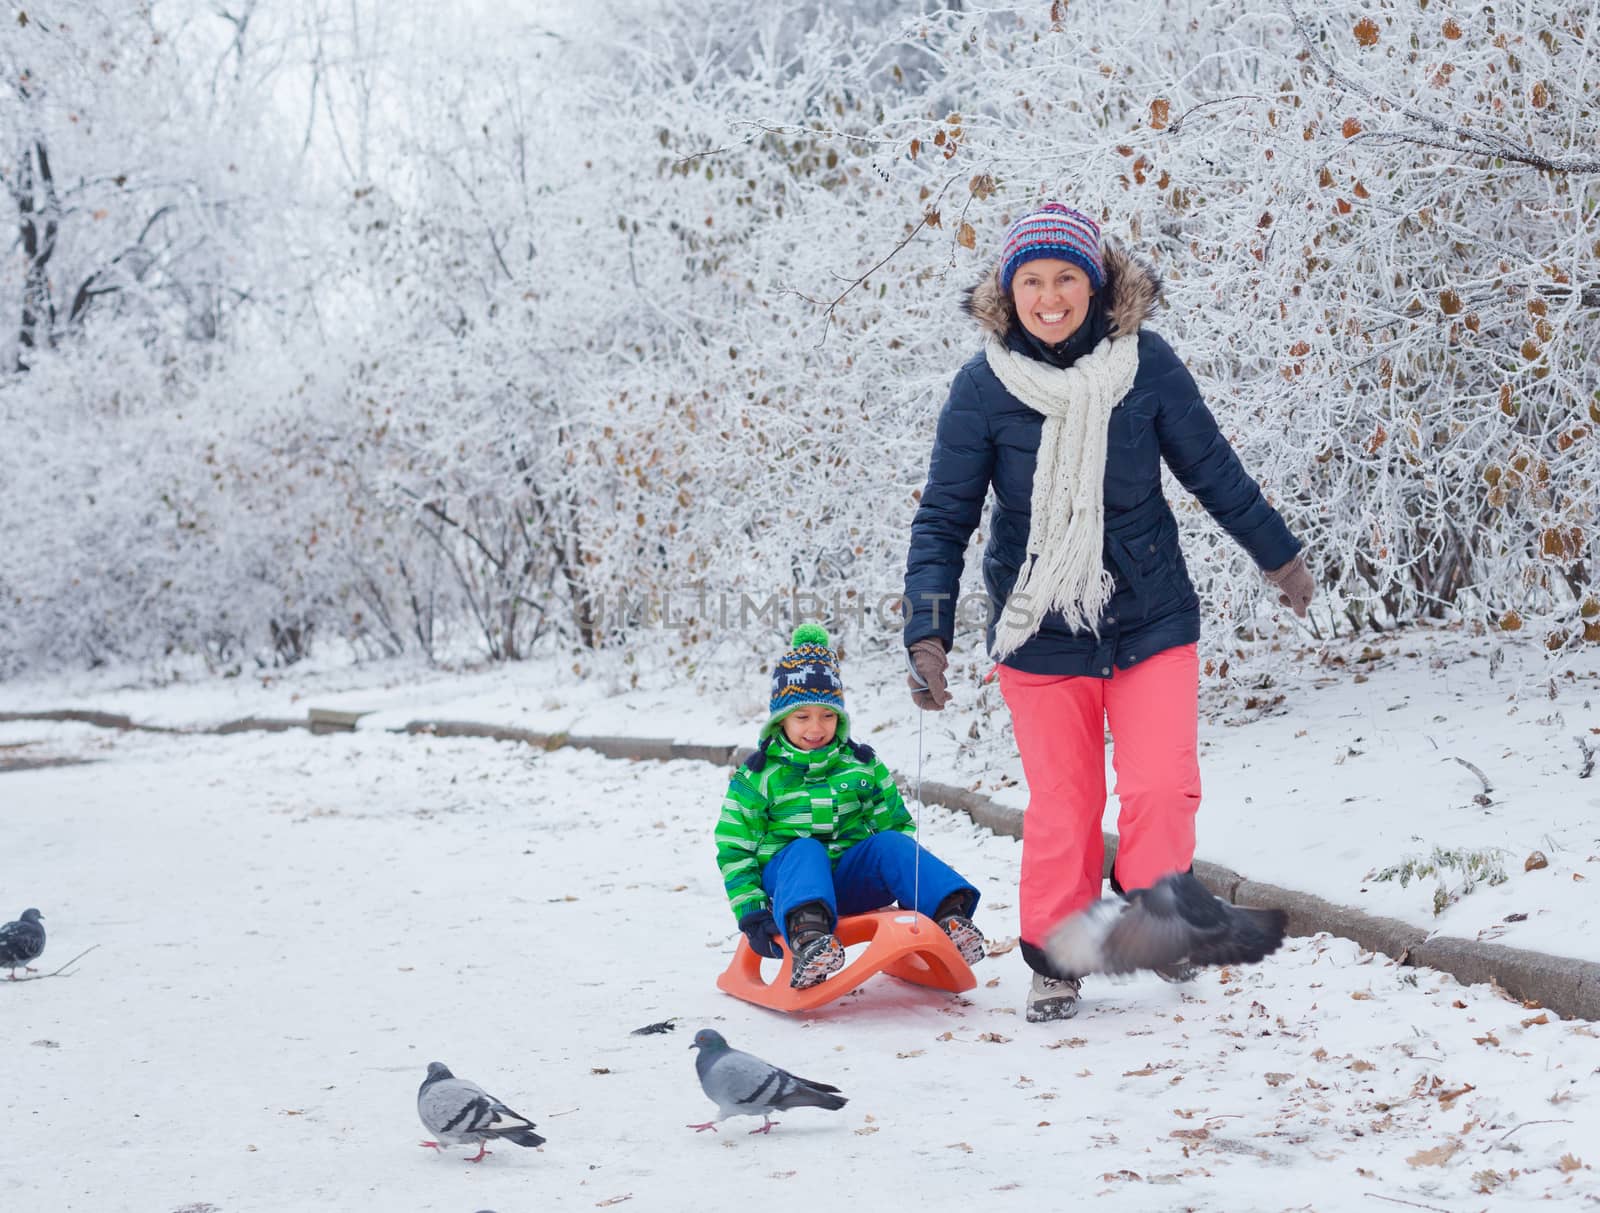 Winter, play, fun - Mother and her cute little son having fun with sled in winter park